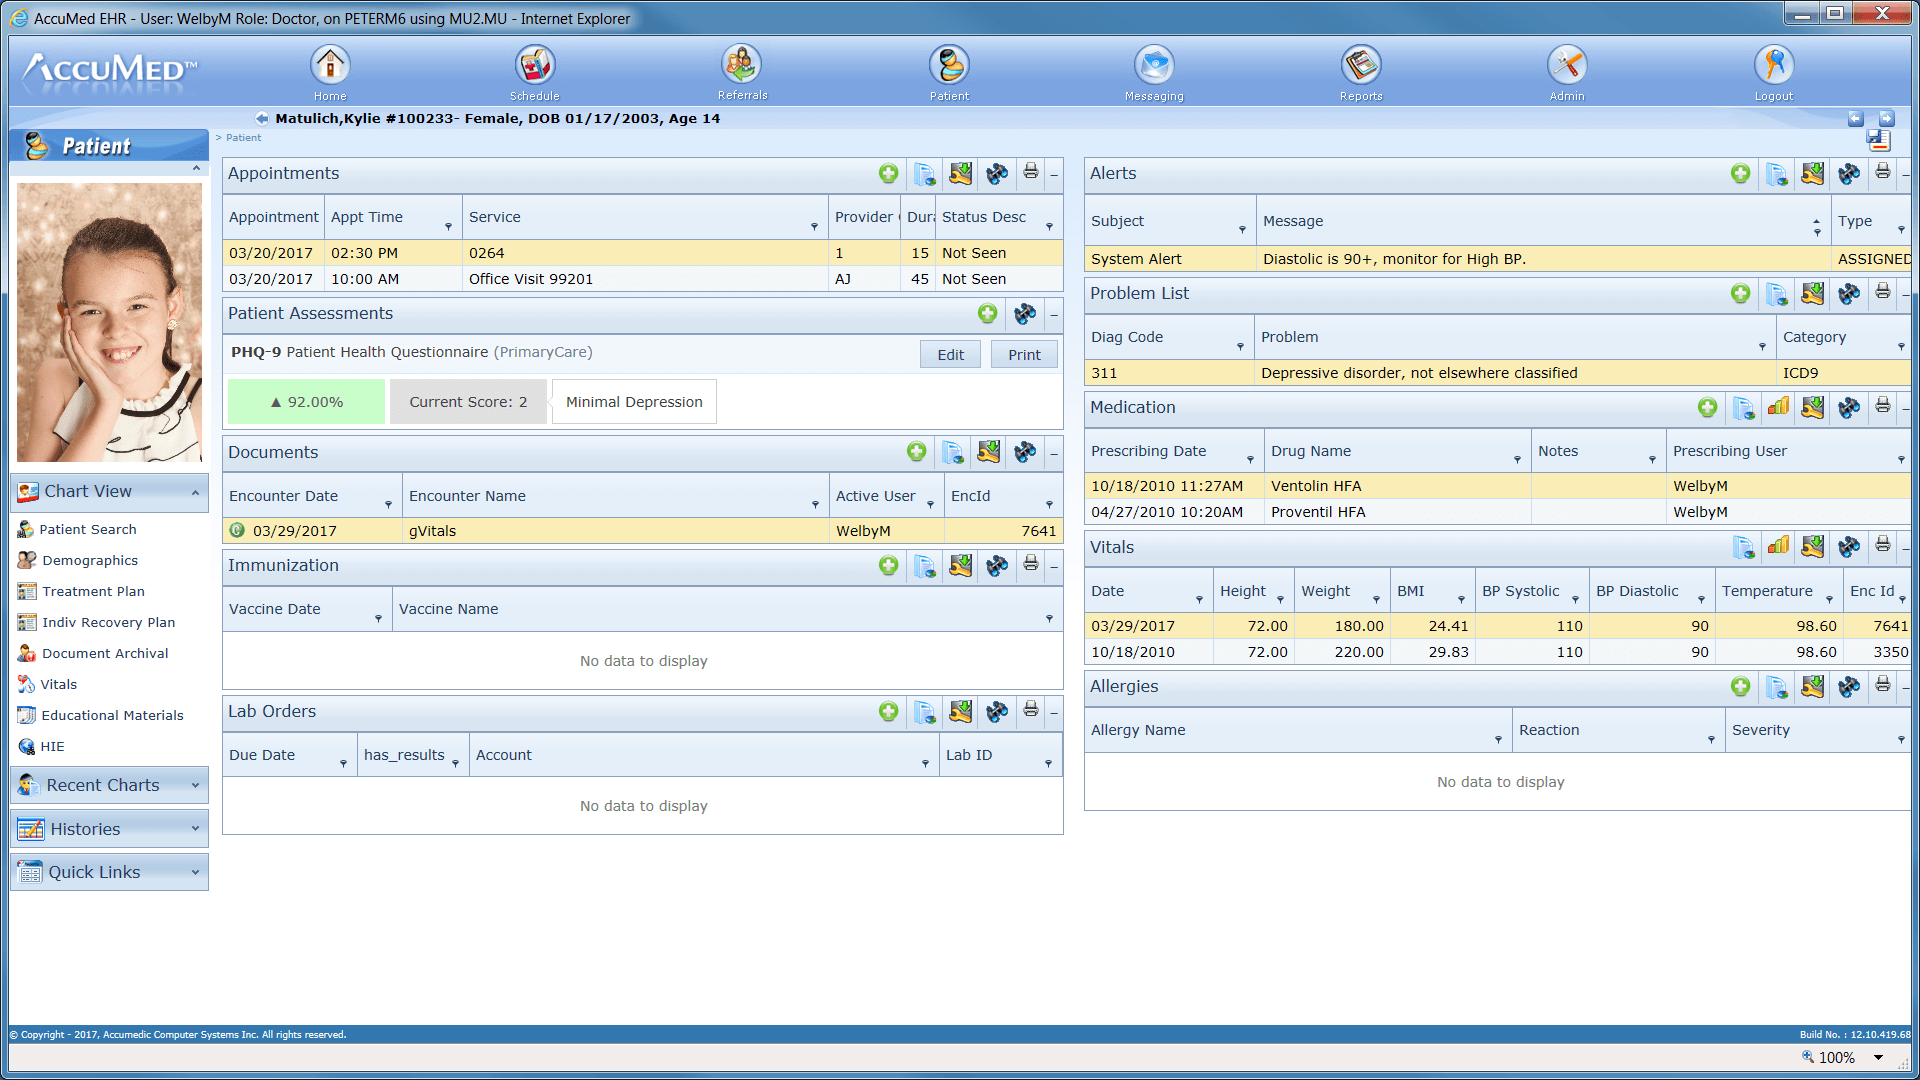 Example of an electronic medical record interface